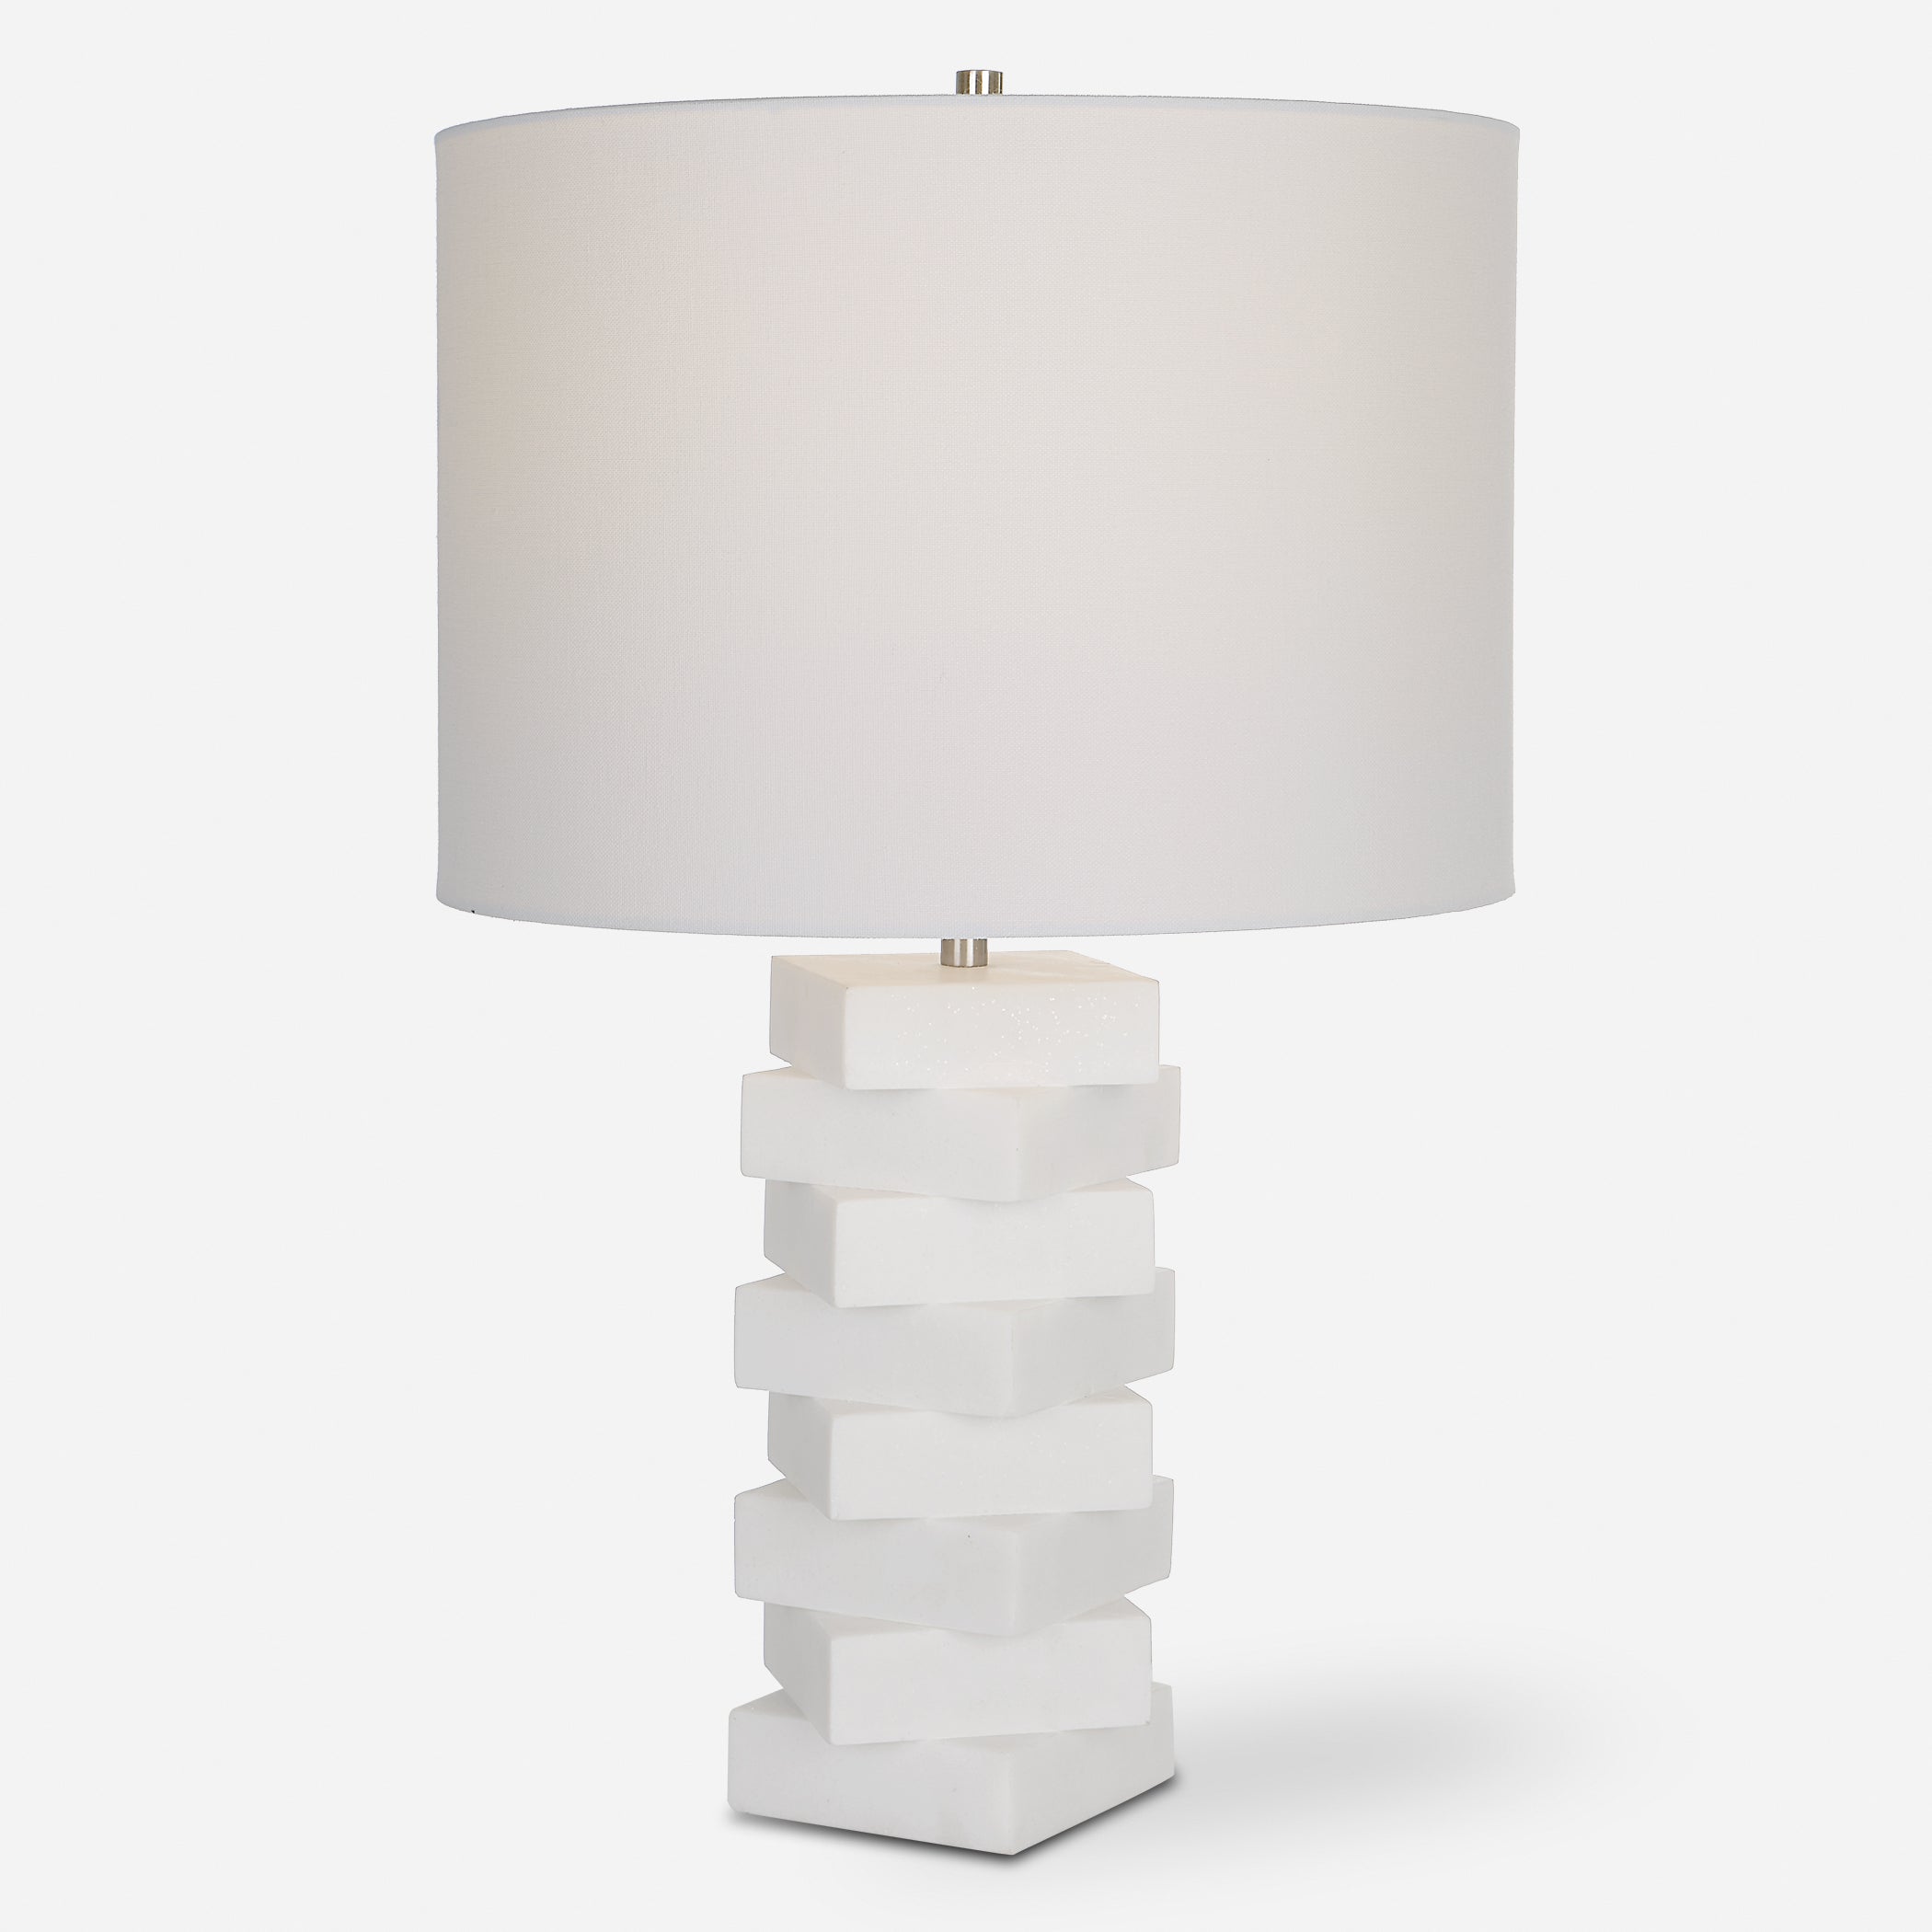 Uttermost Ascent White Geometric Table Lamp White Geometric Table Lamp Uttermost   